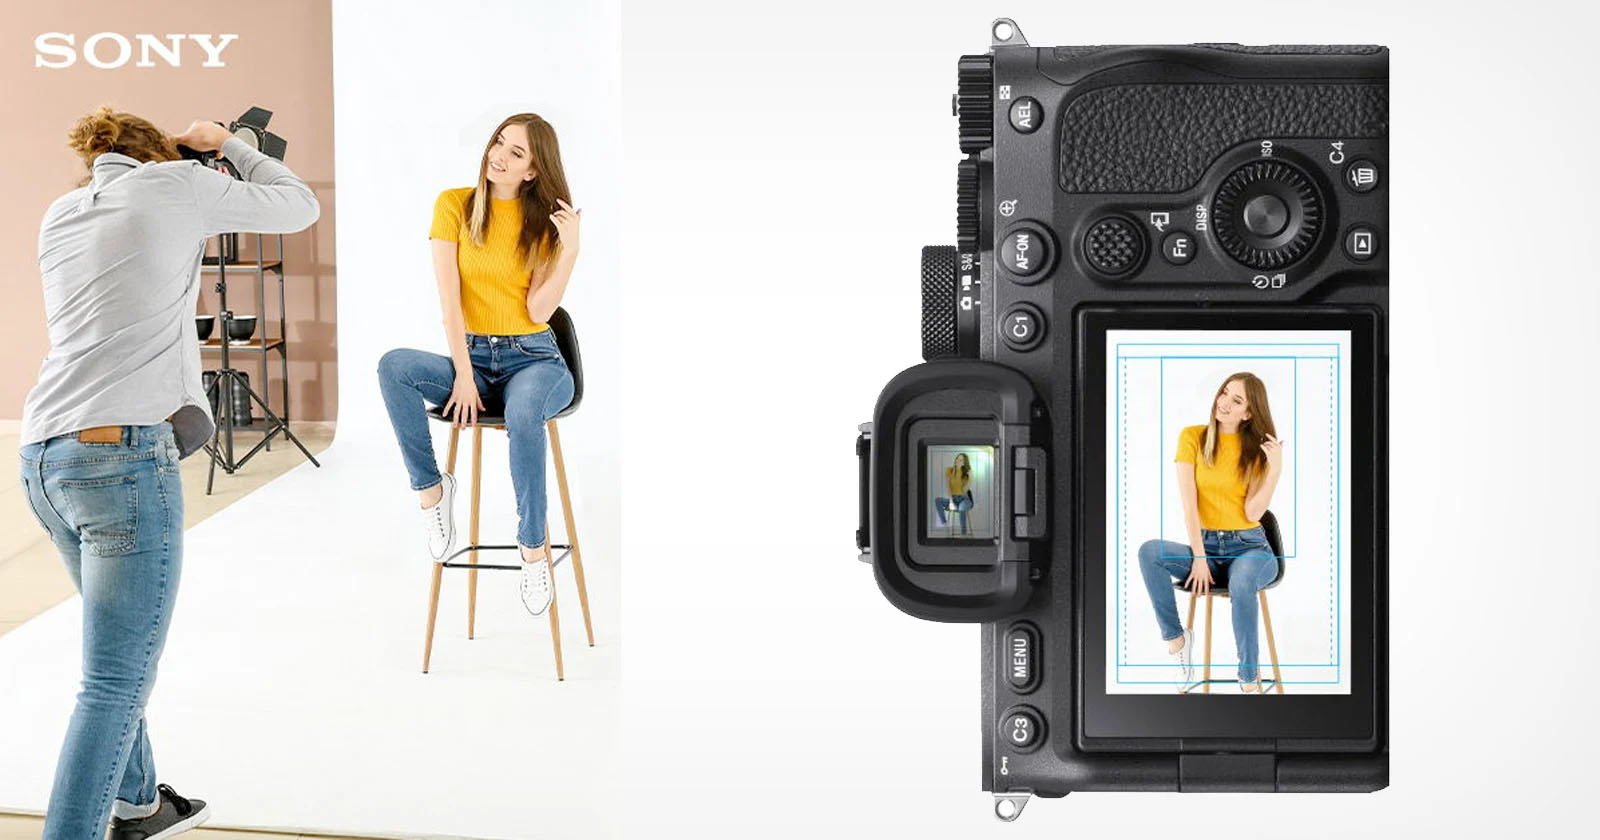 A professional photographer taking a picture of a female model seated on a stool in a studio, depicted conceptually through a sony camera's lcd screen showing the focused photo.